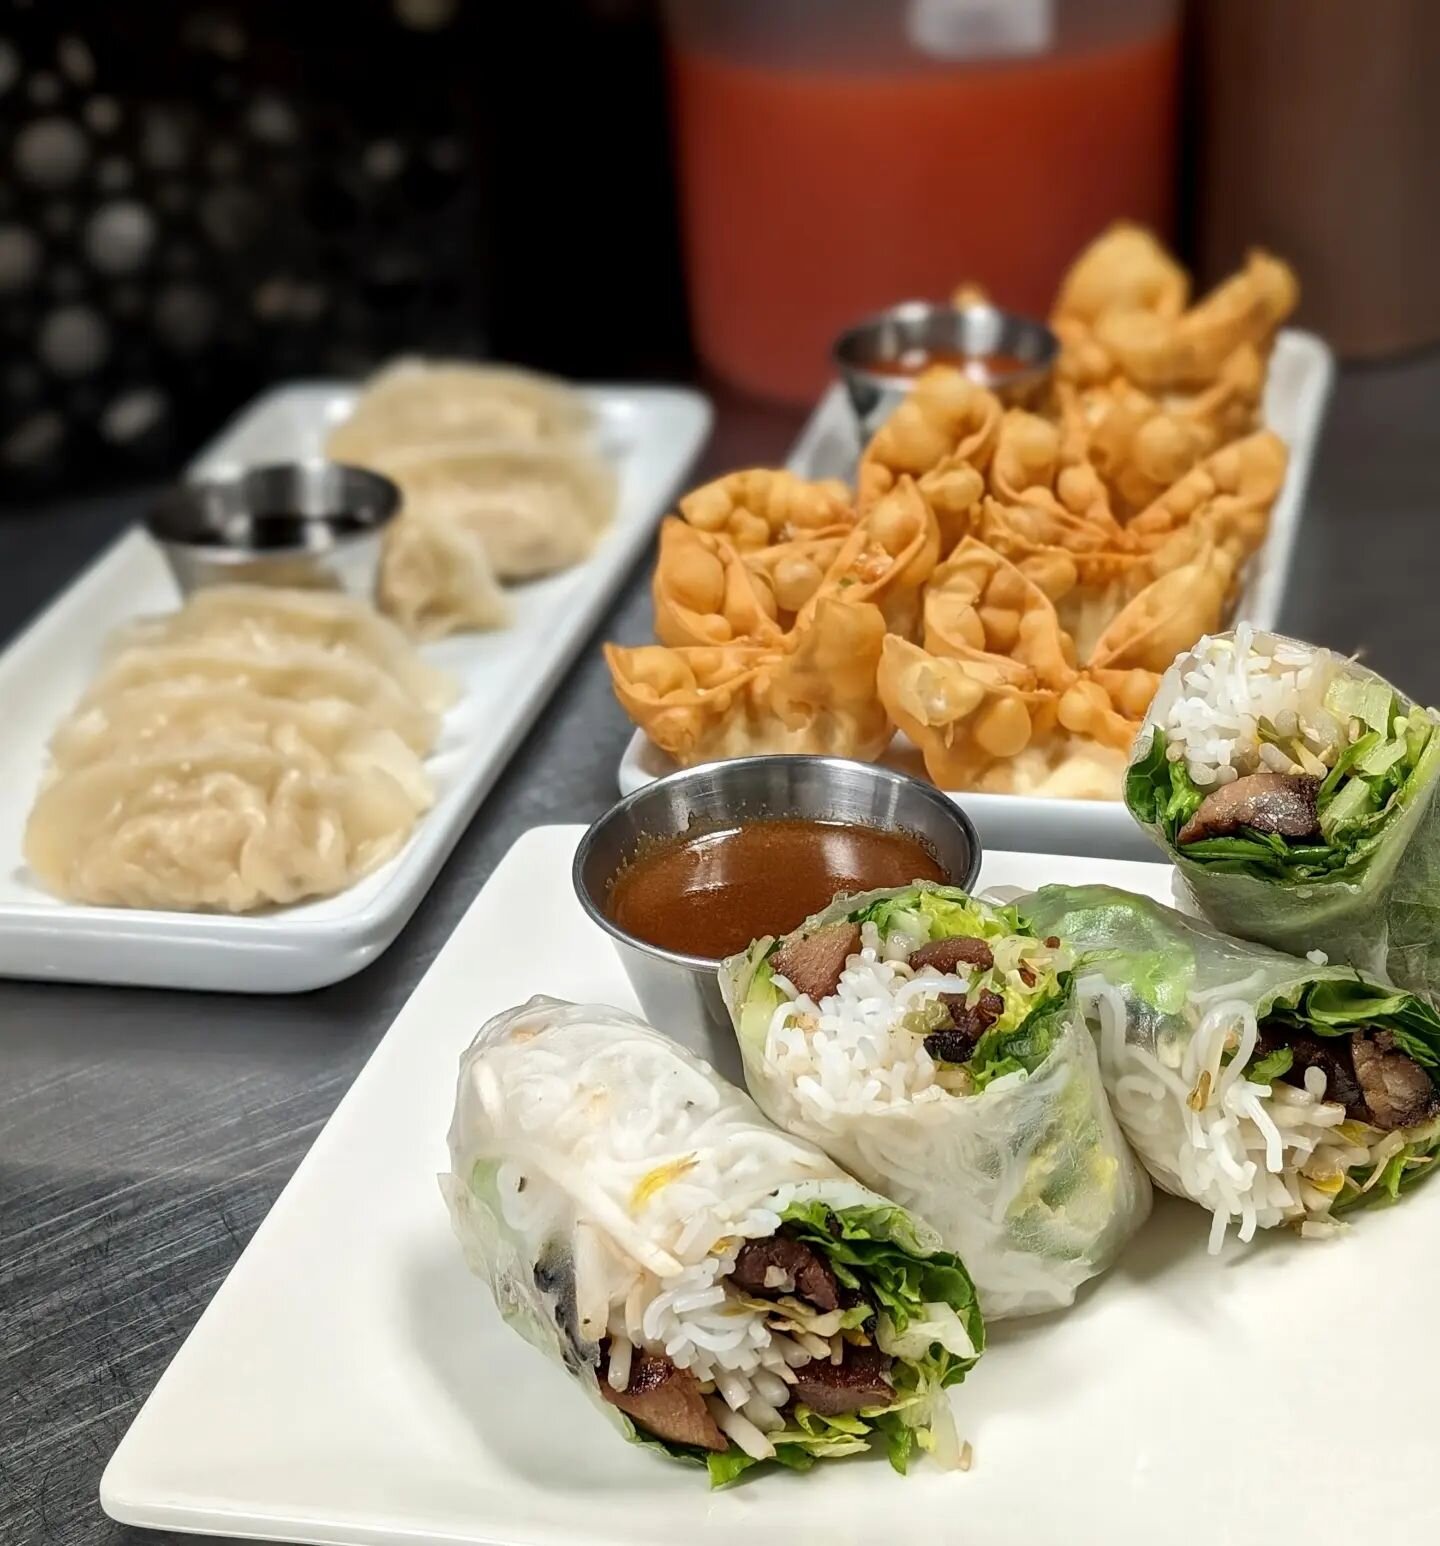 When you can't decide, just get one of each! 

Pictured here is:
- Springrolls with grilled pork 
- Crab rangoons 
- Steamed Dumplings 

#portlandtx #portlandtxsmallbusiness #thericehat #thericehattx #cceats